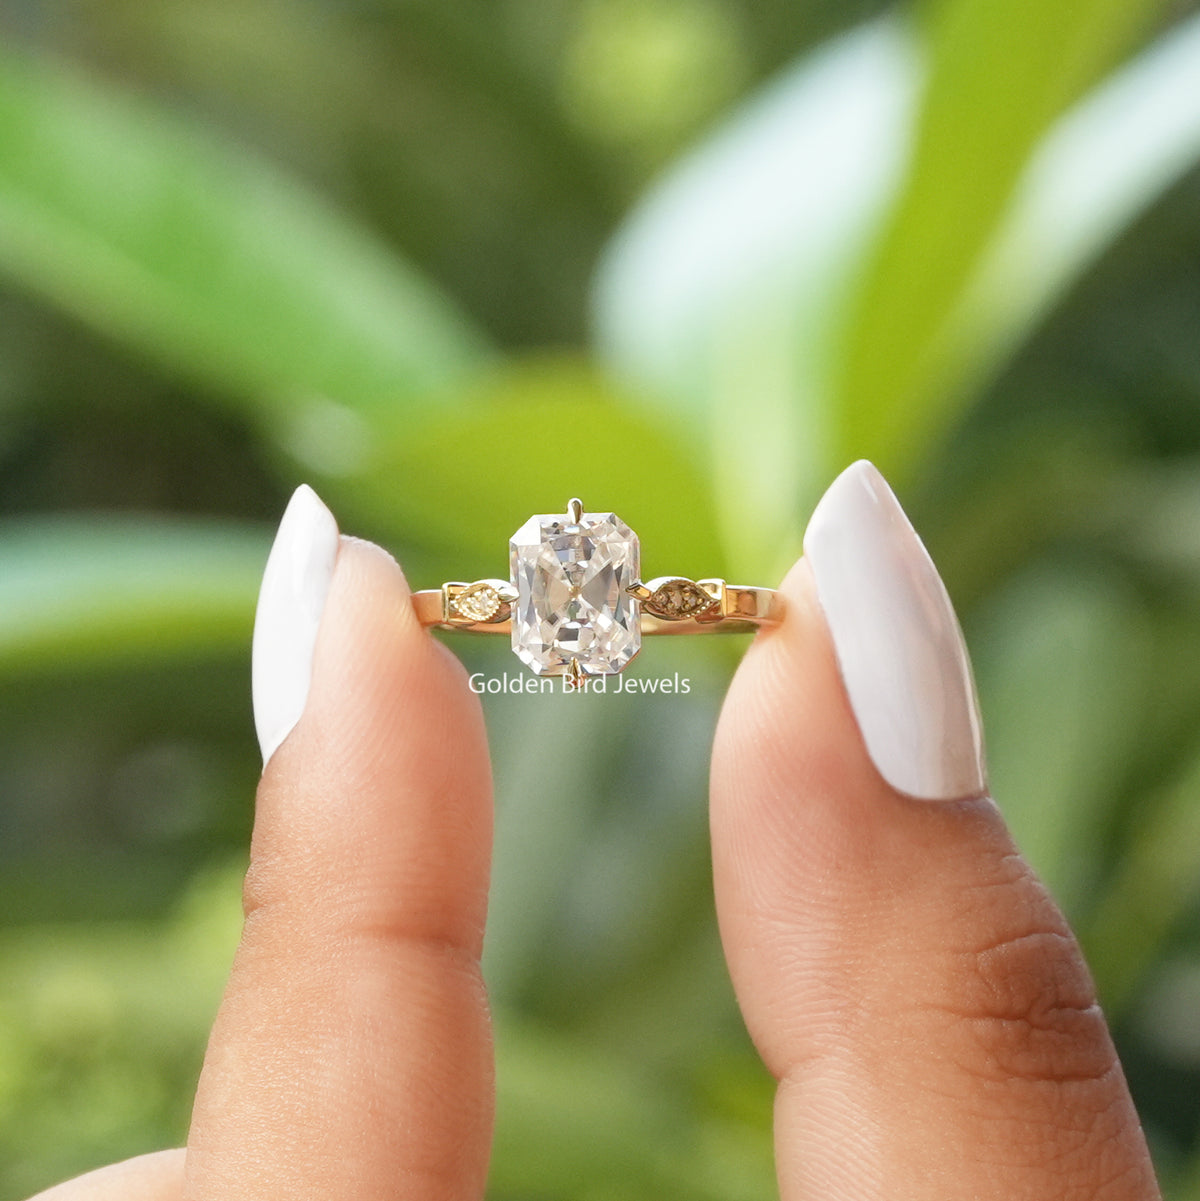 [In two finger front view of moissanite old mine radiant cut engagement ring made of prong setting]-[Golden Bird Jewels]